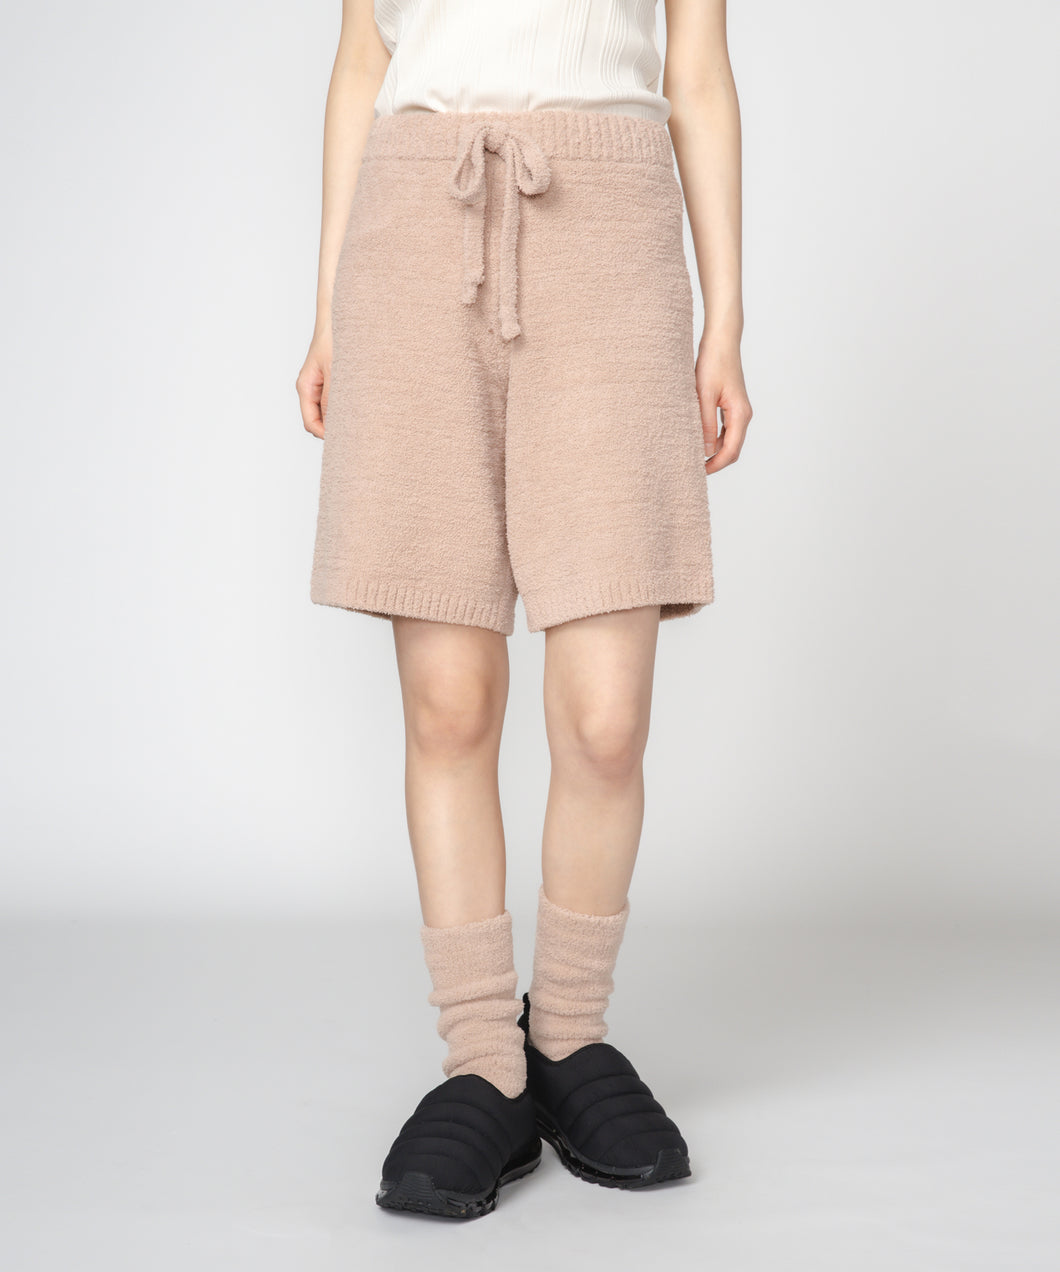 【WOMEN】nestwell HILLMYNA - Relaxed Fit Half Pants -